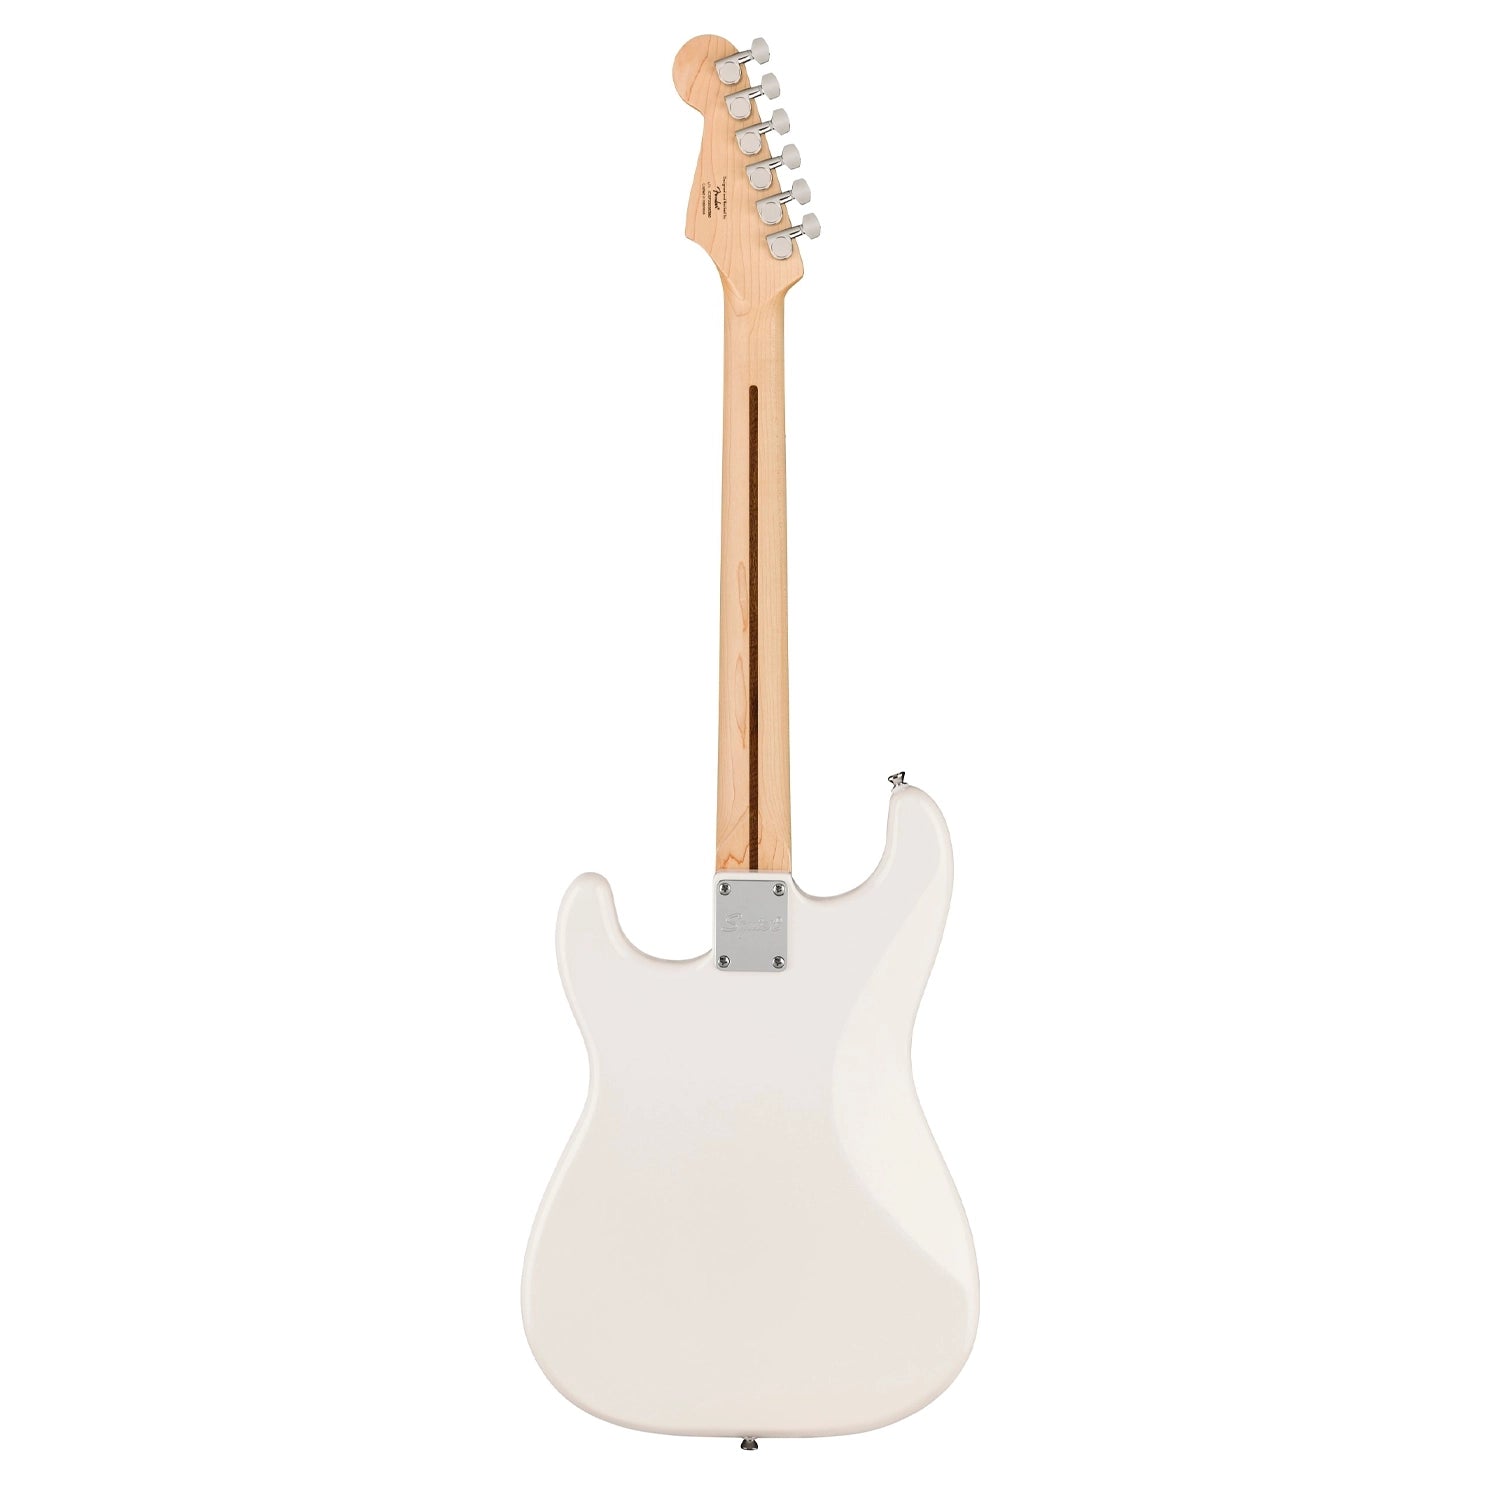 Squier Sonic Stratocaster Ht Electric Guitar  - White